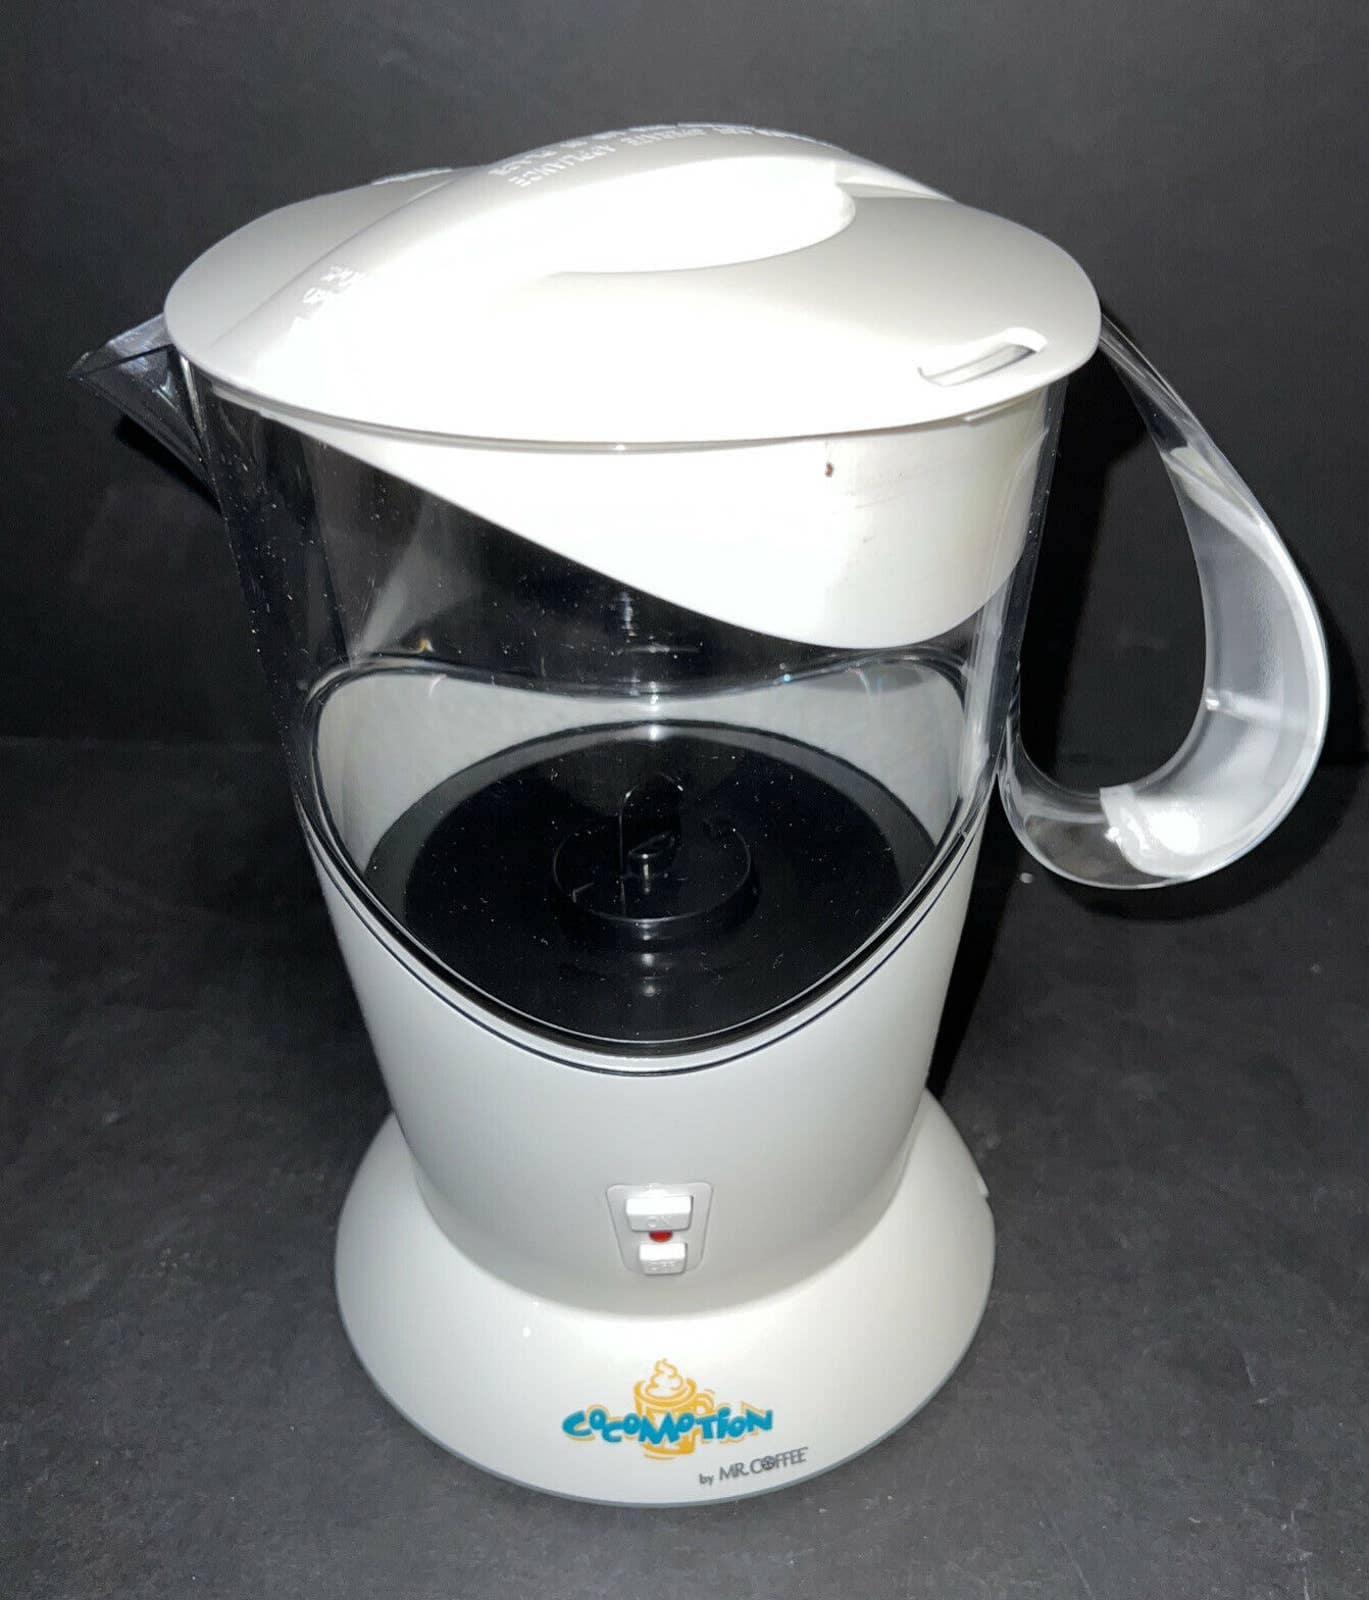 Cocomotion By Mr. Coffee Hot Chocolate Maker Machine Model HC4